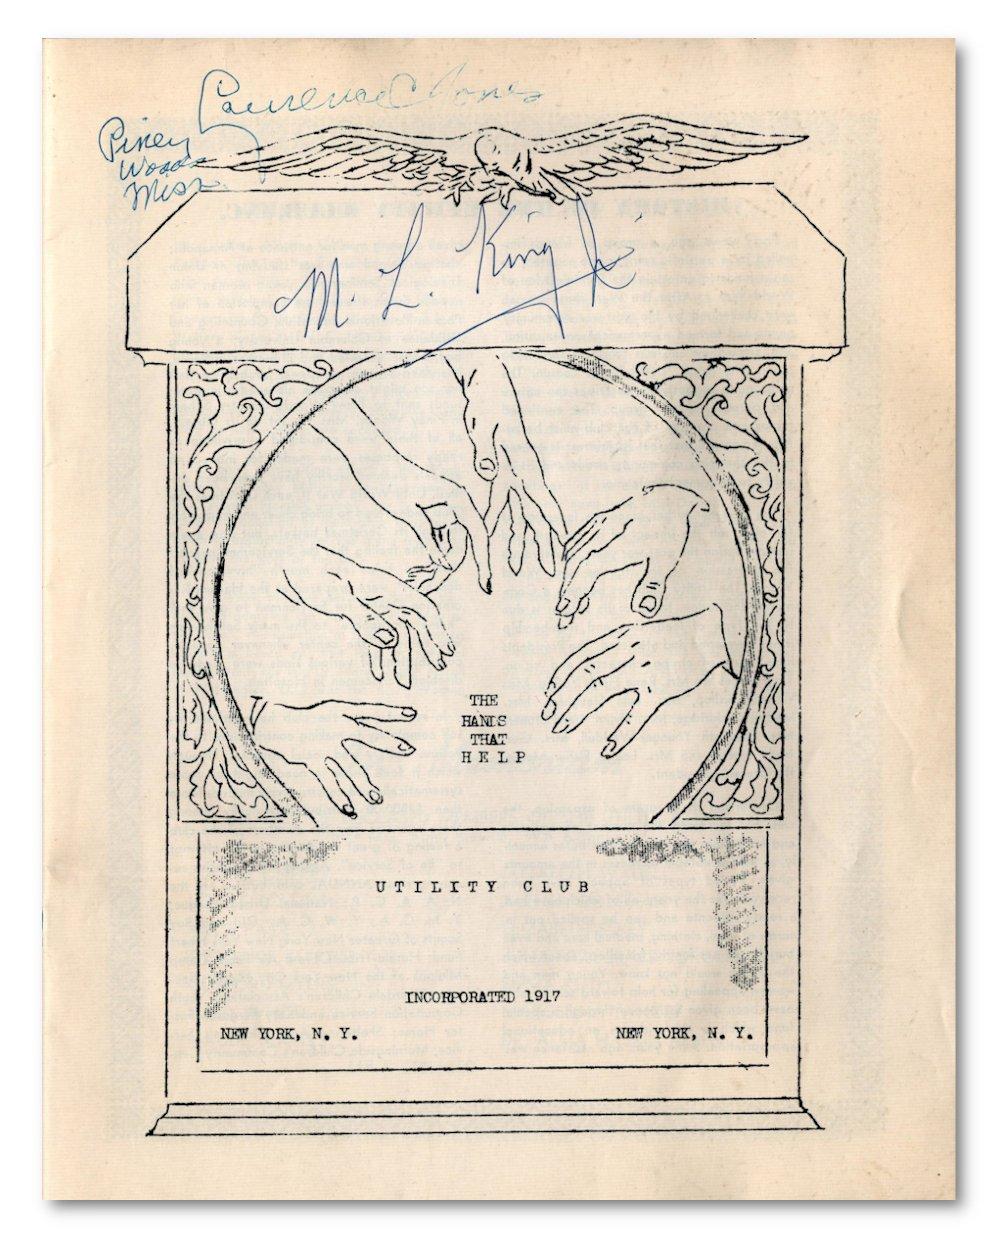 A rare and historic programme signed by the Civil Rights leader Martin Luther King Jr.
Georgia-born preacher Martin Luther King Jr (1929 - 1968) was the de facto leader of the American Civil Rights Movement.

He led the Montgomery Bus Boycott in